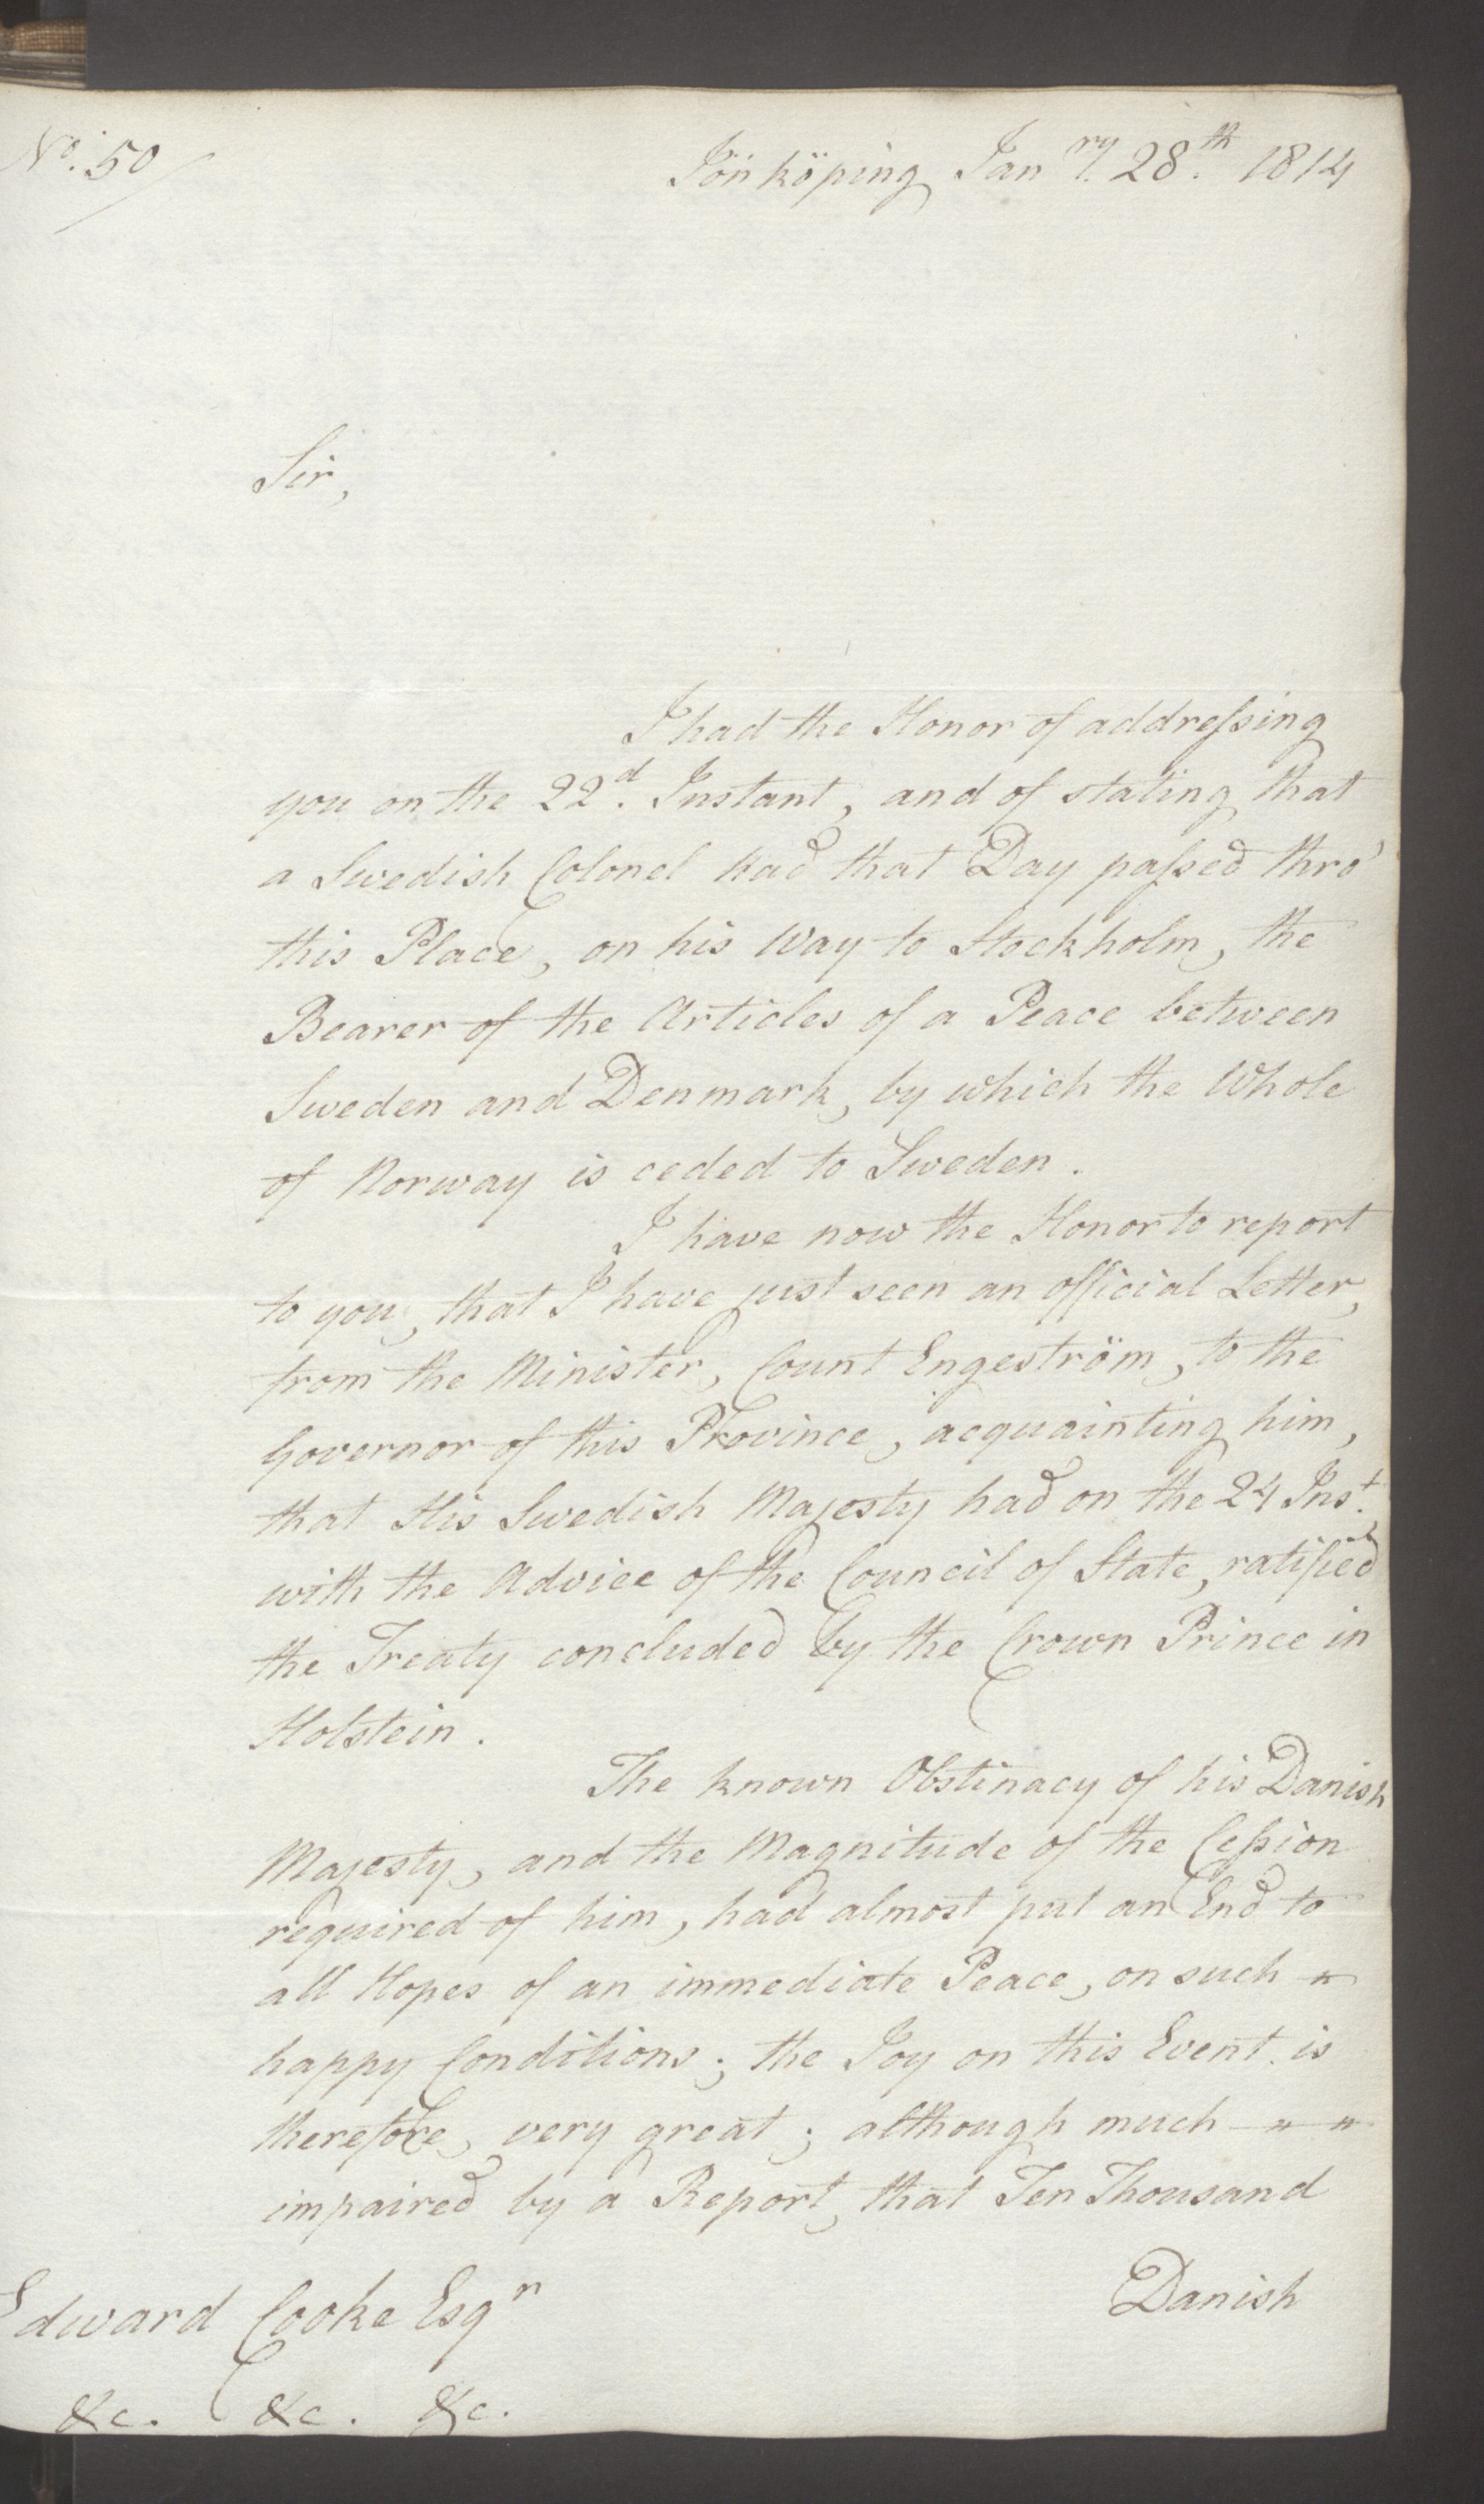 Foreign Office*, UKA/-/FO 38/16: Sir C. Gordon. Reports from Malmö, Jonkoping, and Helsingborg, 1814, s. 14